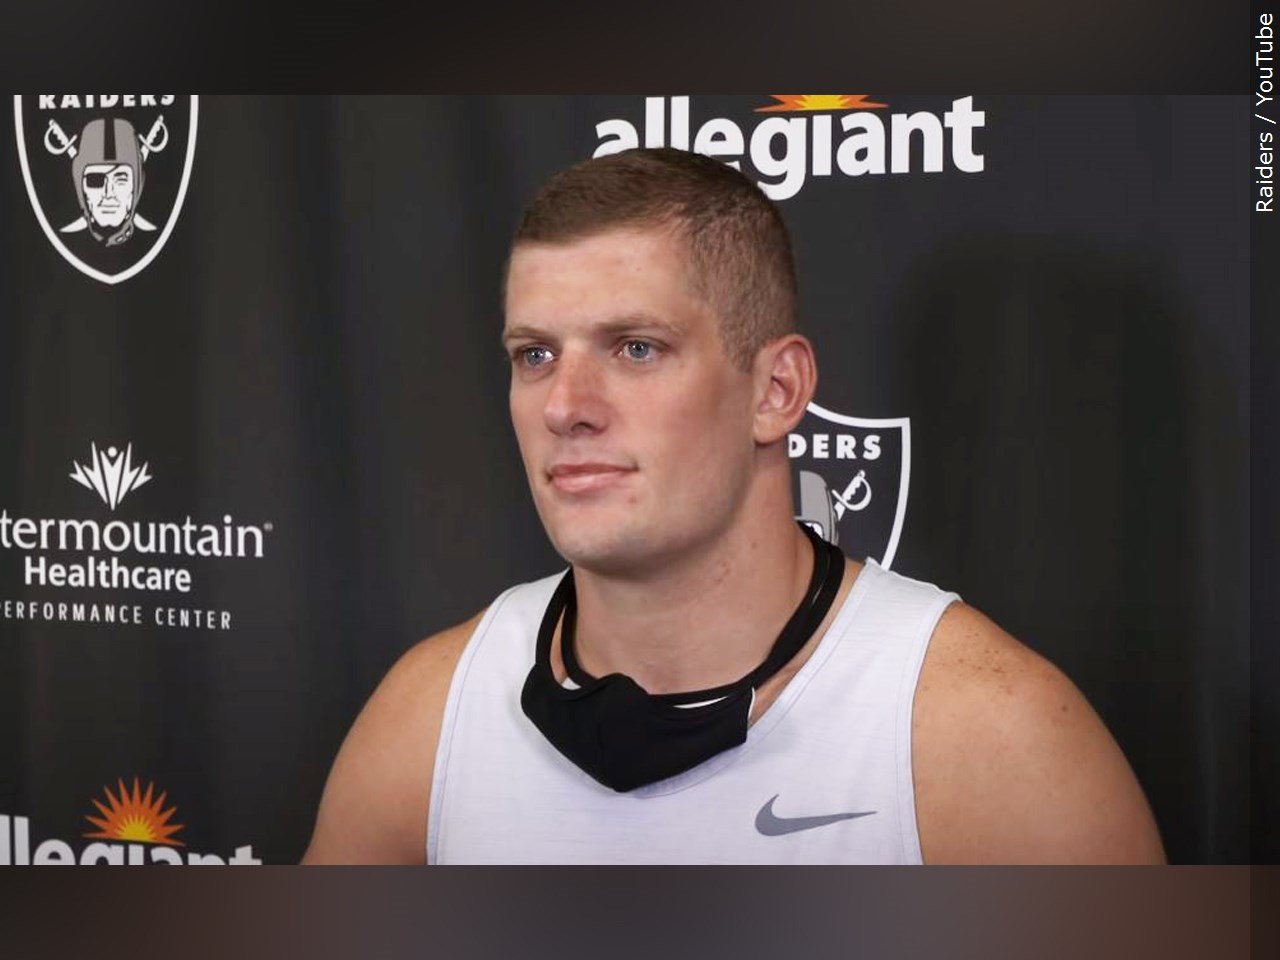 Raiders' Carl Nassib becomes first openly-gay active NFL player